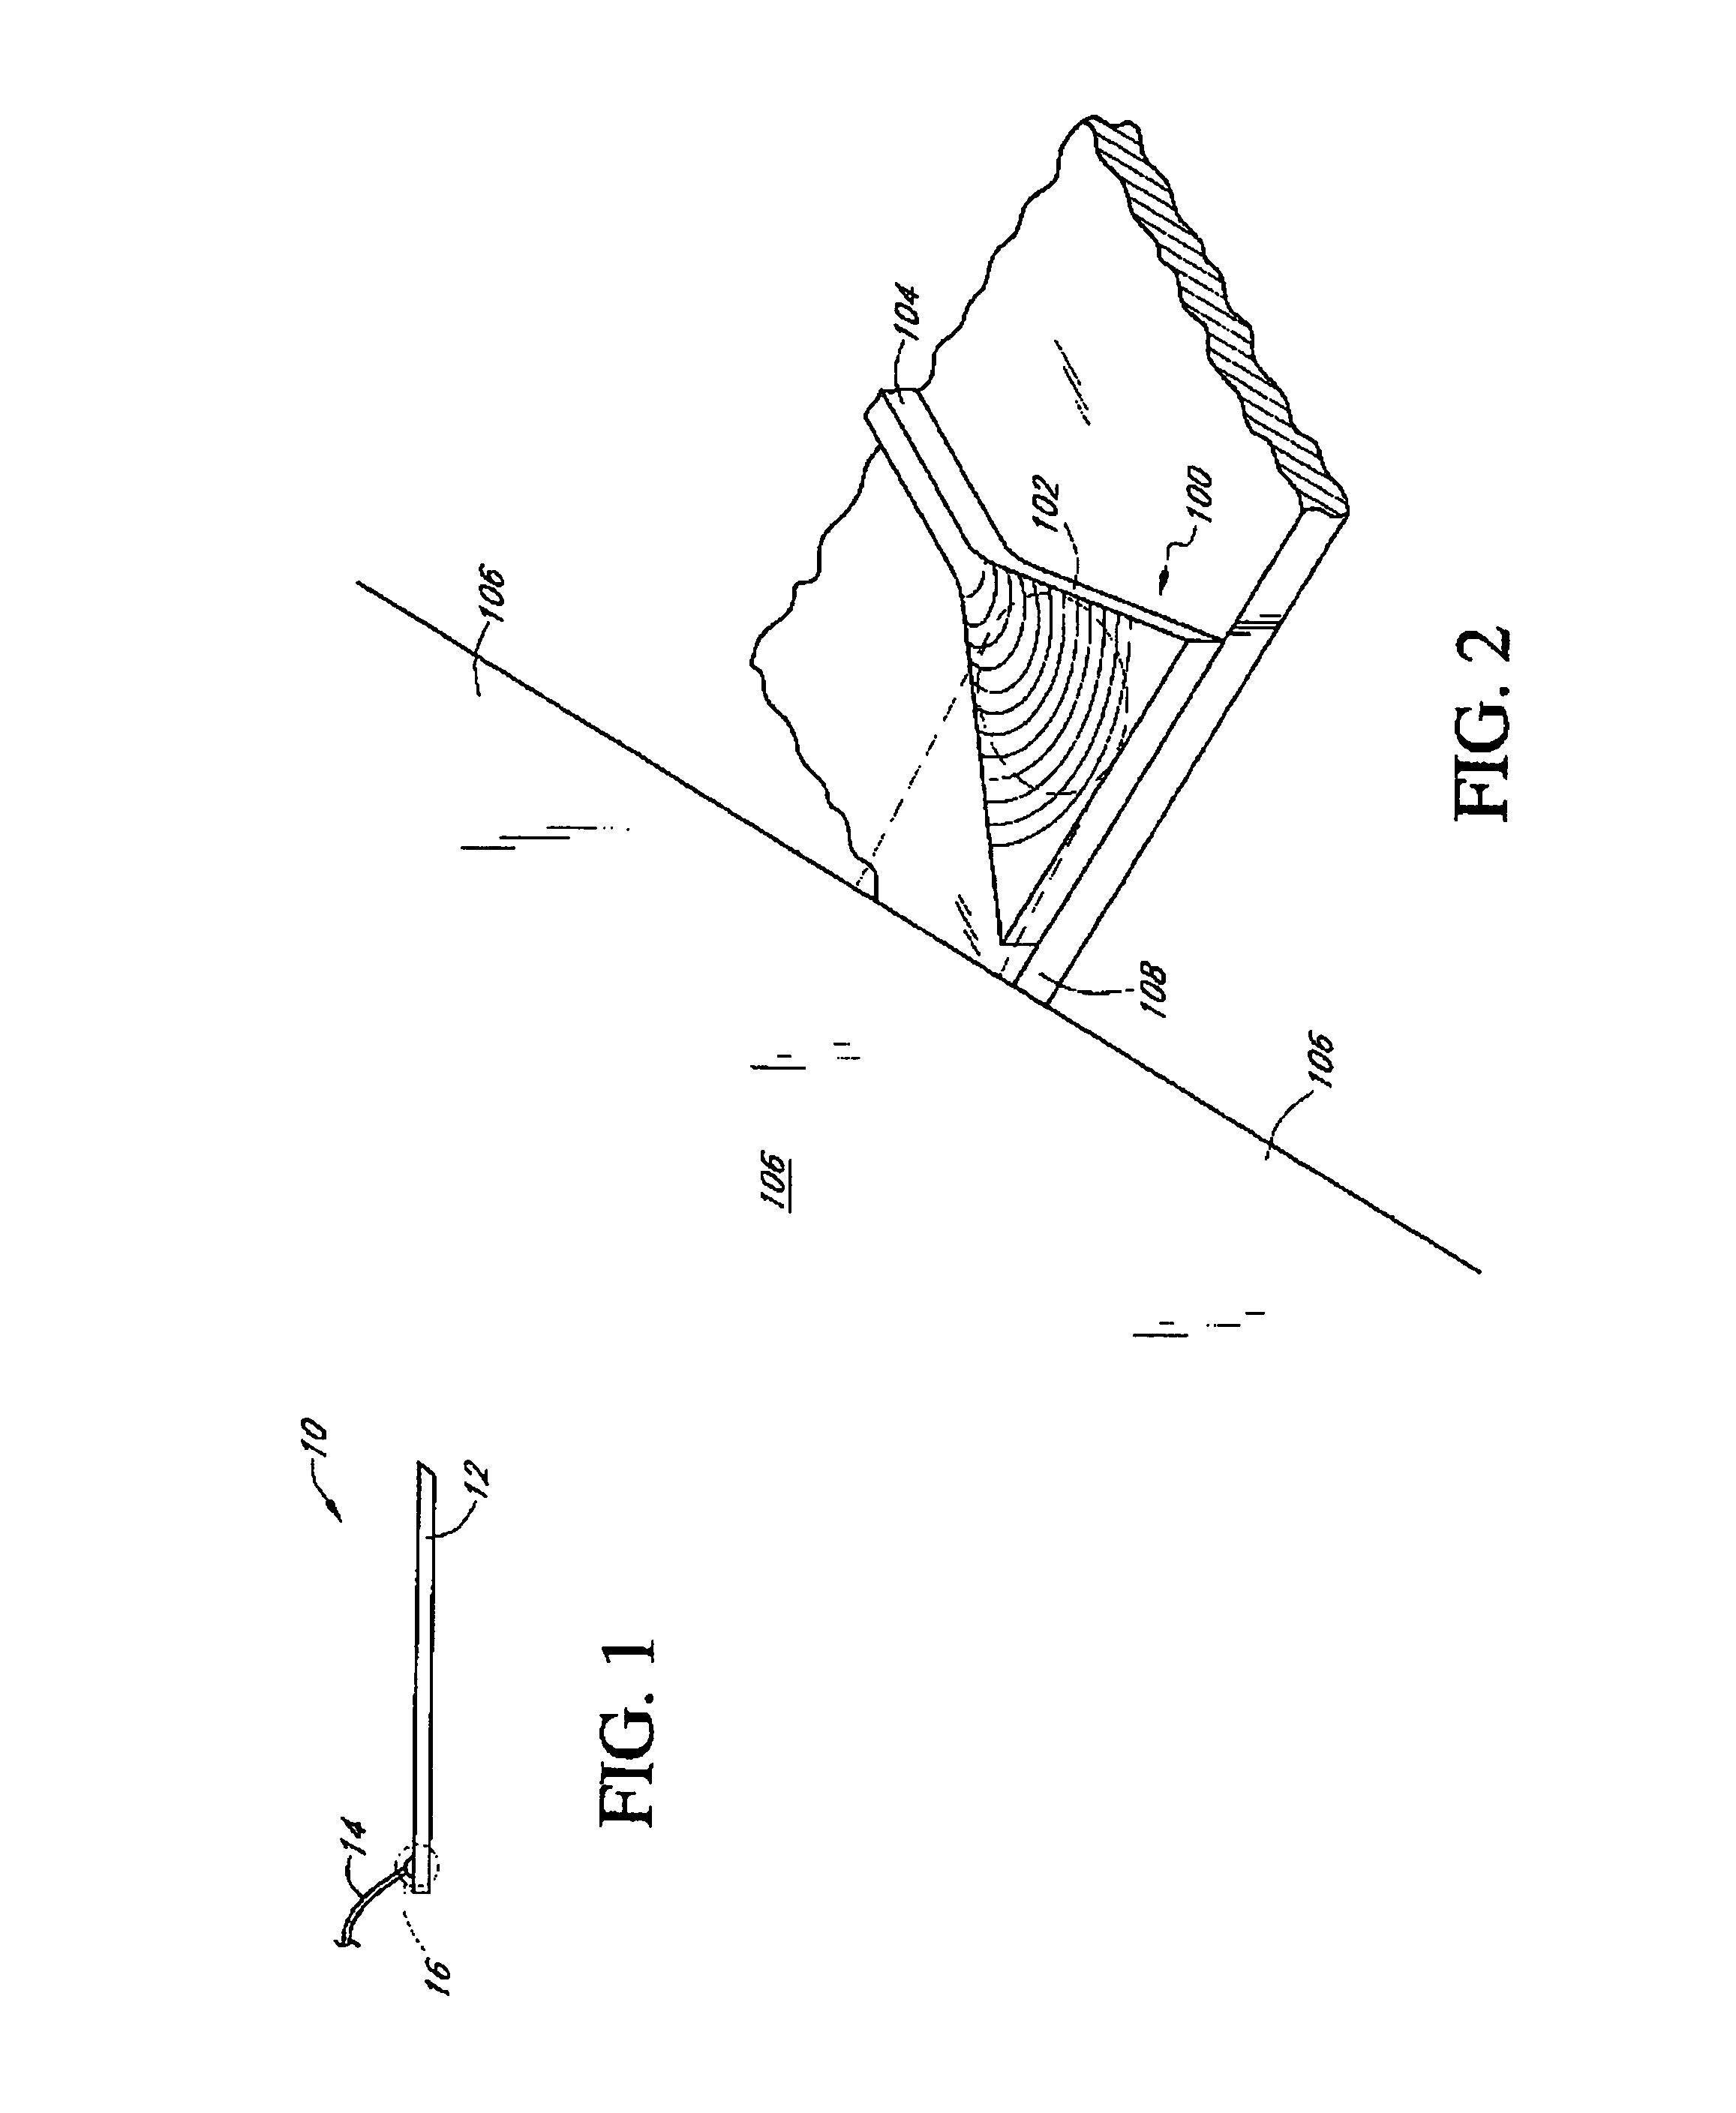 Optical waveguide grating coupler with varying scatter cross sections